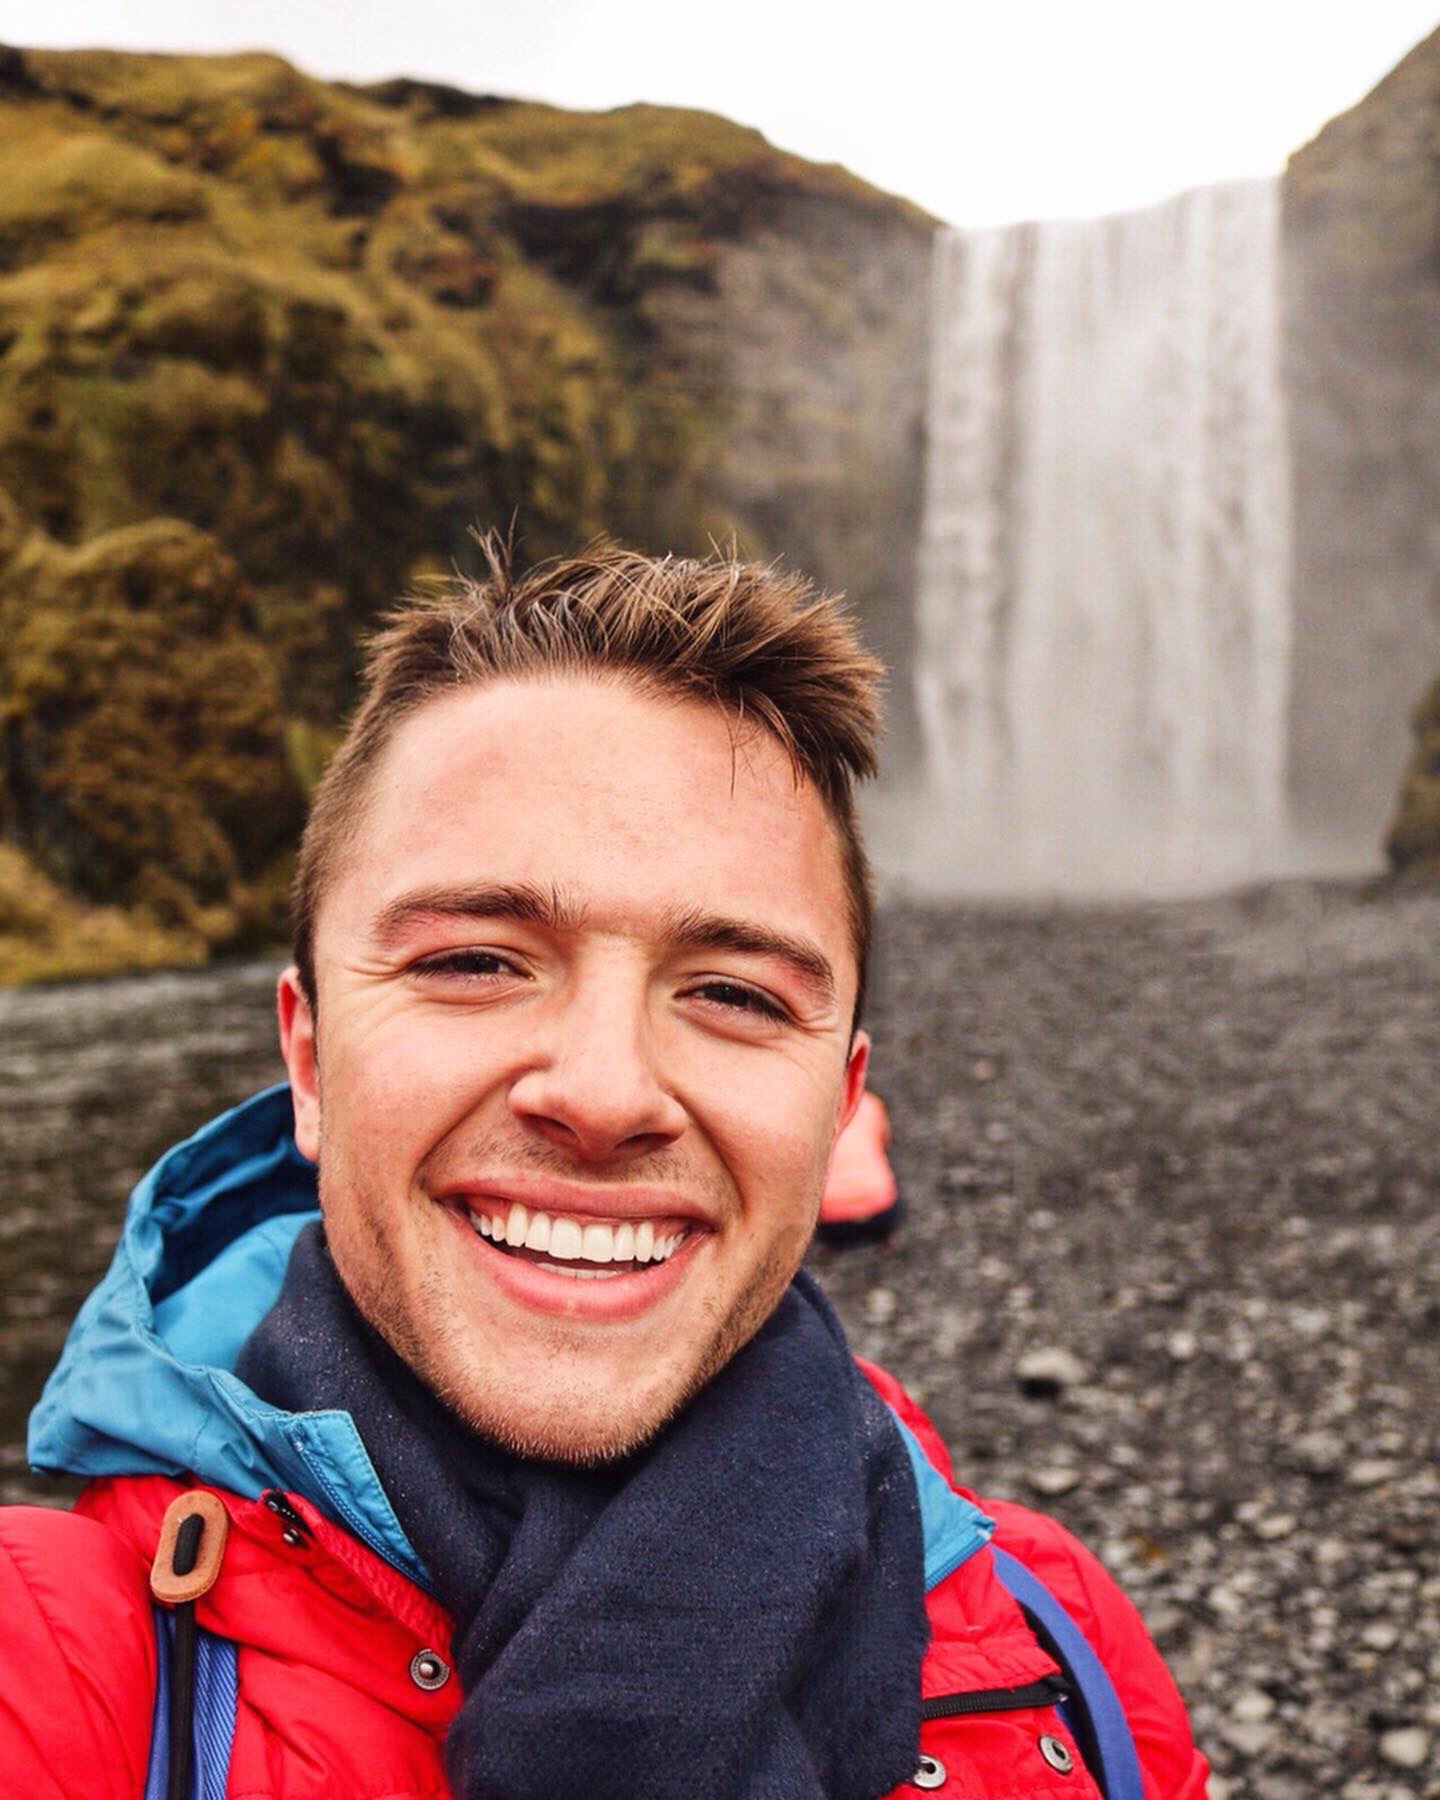 a picture of Nick, a 24-year-old man with short brown hair, brown eyes, and a bright smile poses for a selfie in the foreground with a waterfall in the background - Nick is wearing a red winter coat over a blue rain coat, and a cotton navy-colored scarf